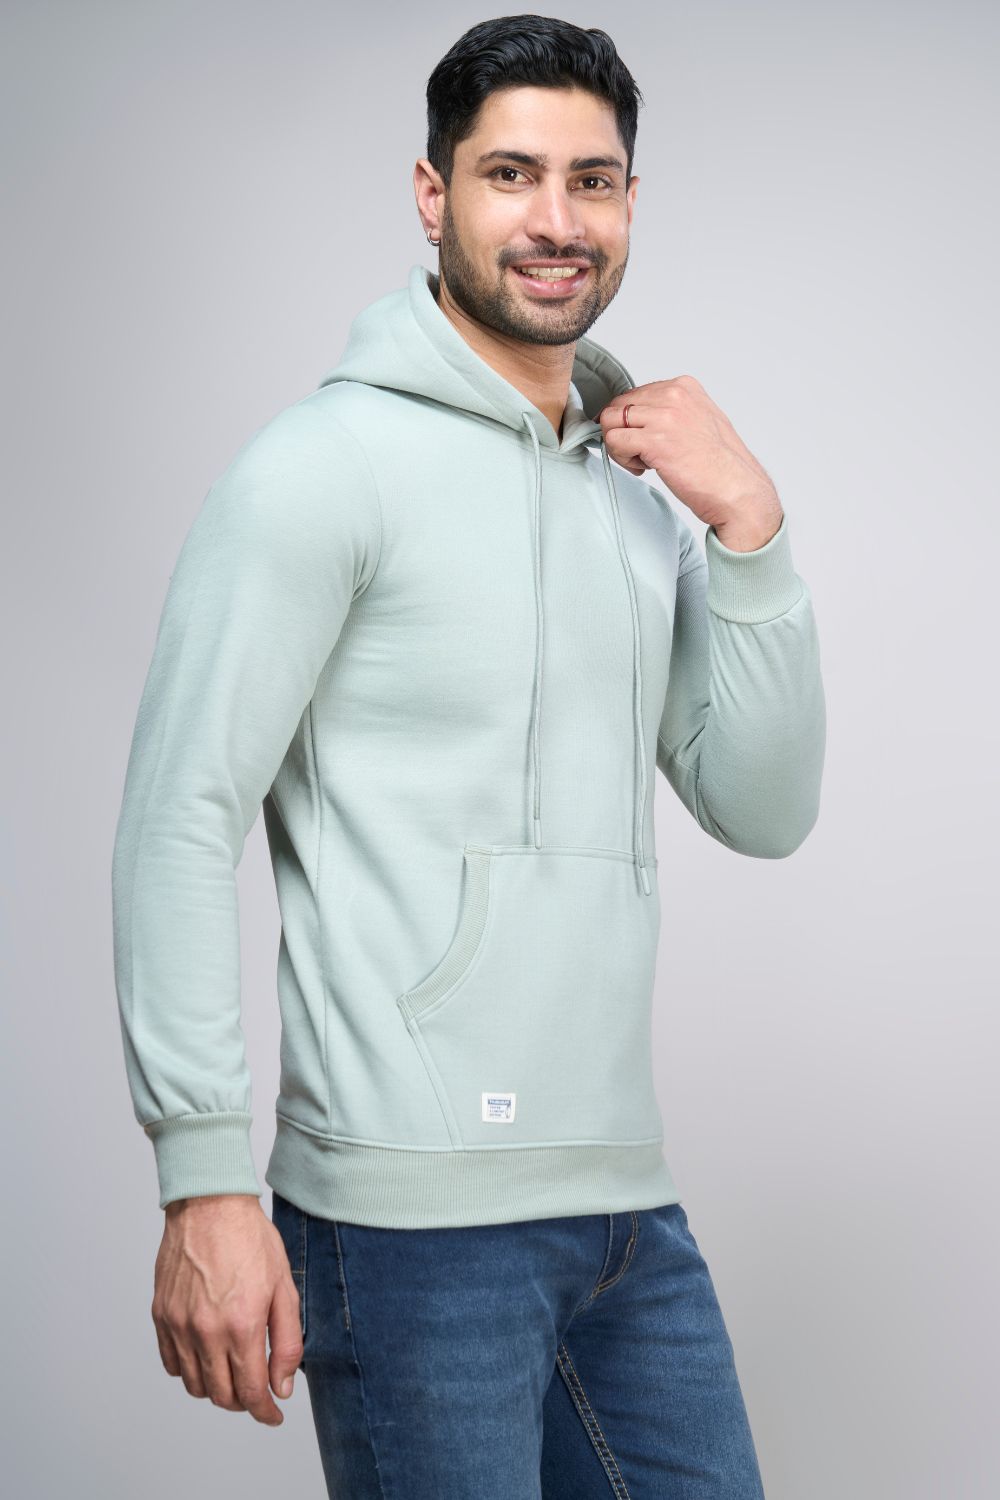 Sea Green colored, hoodie for men with full sleeves and relaxed fit, pocket view.